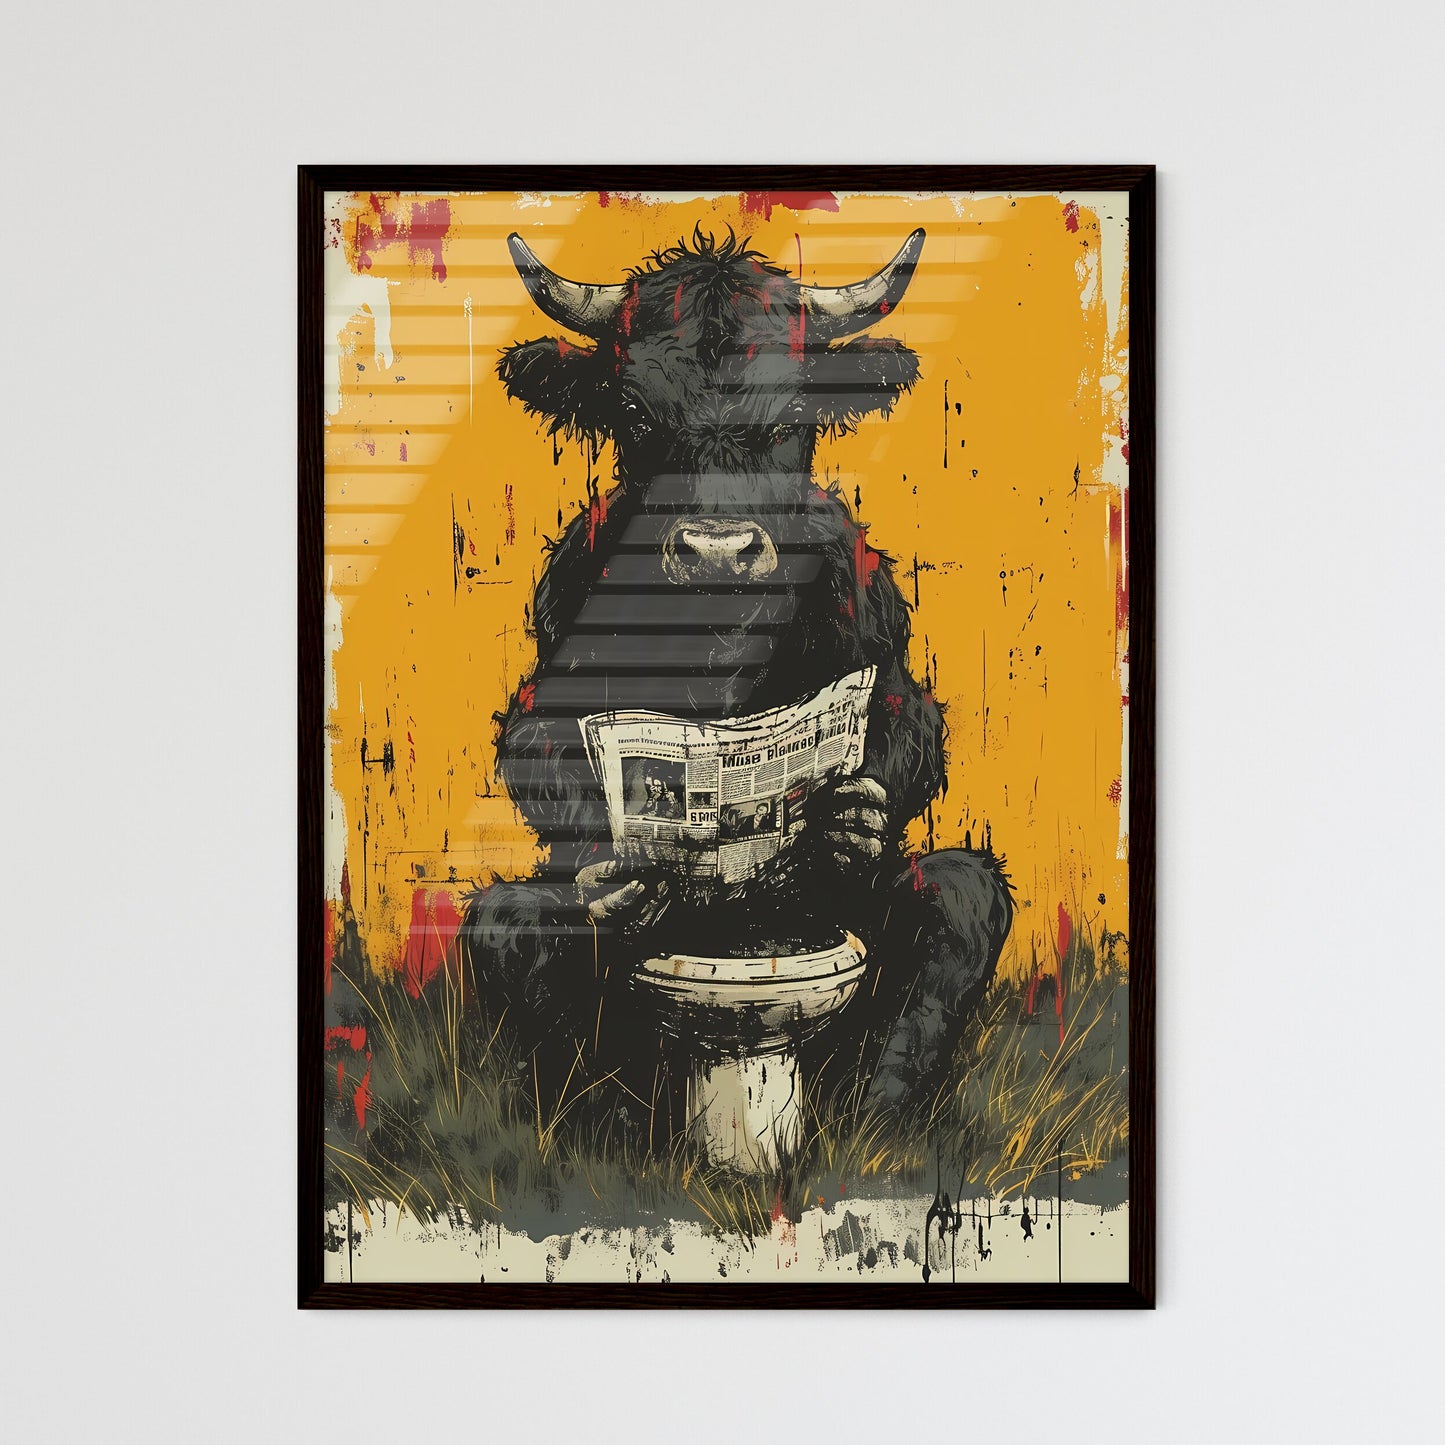 A cow sitting on a tiny toilet - Art print of a bull sitting on a toilet reading a newspaper Default Title